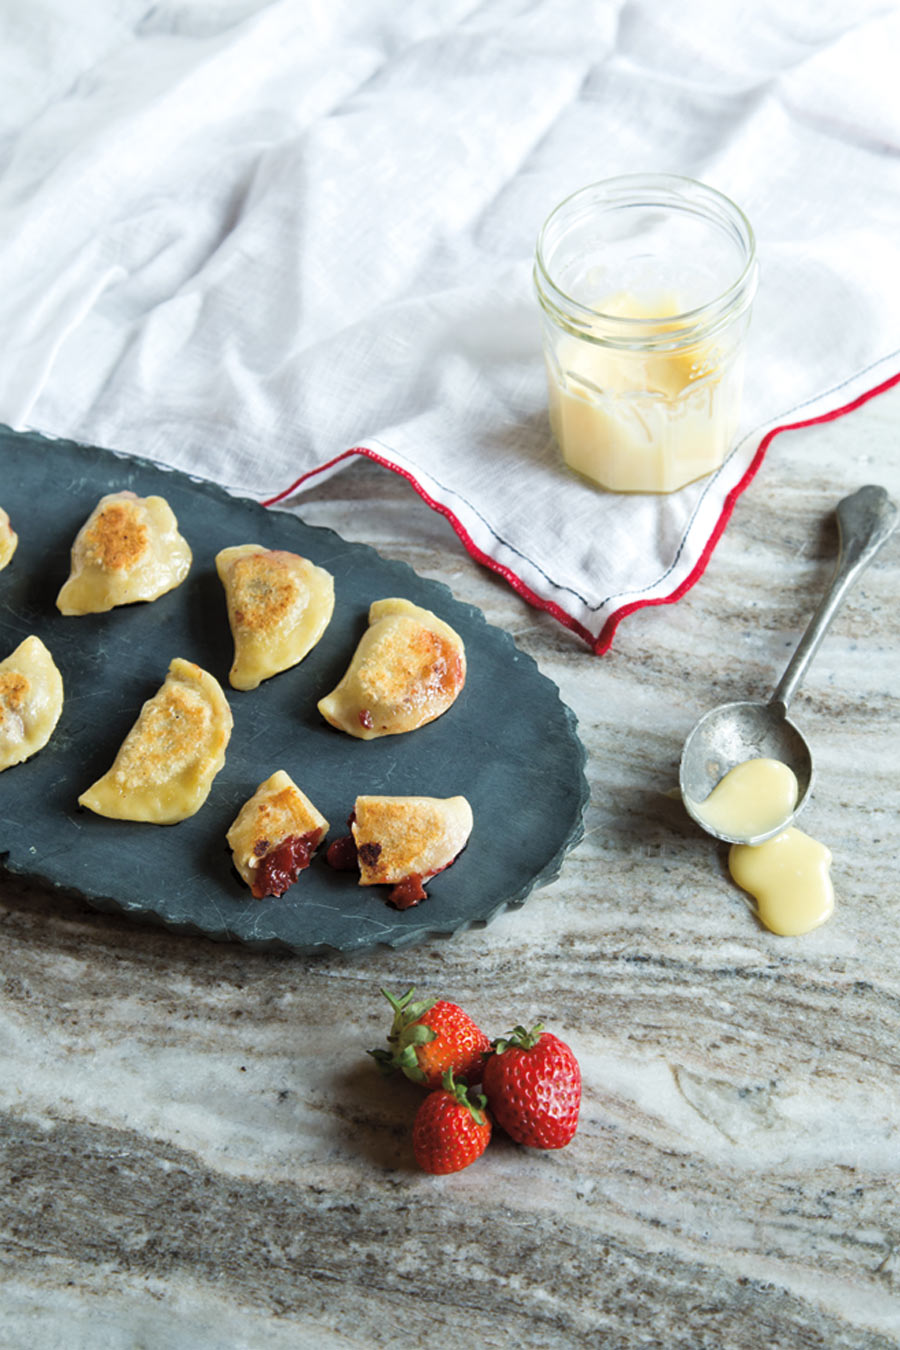 Plate of pierogies with fruit and glaze